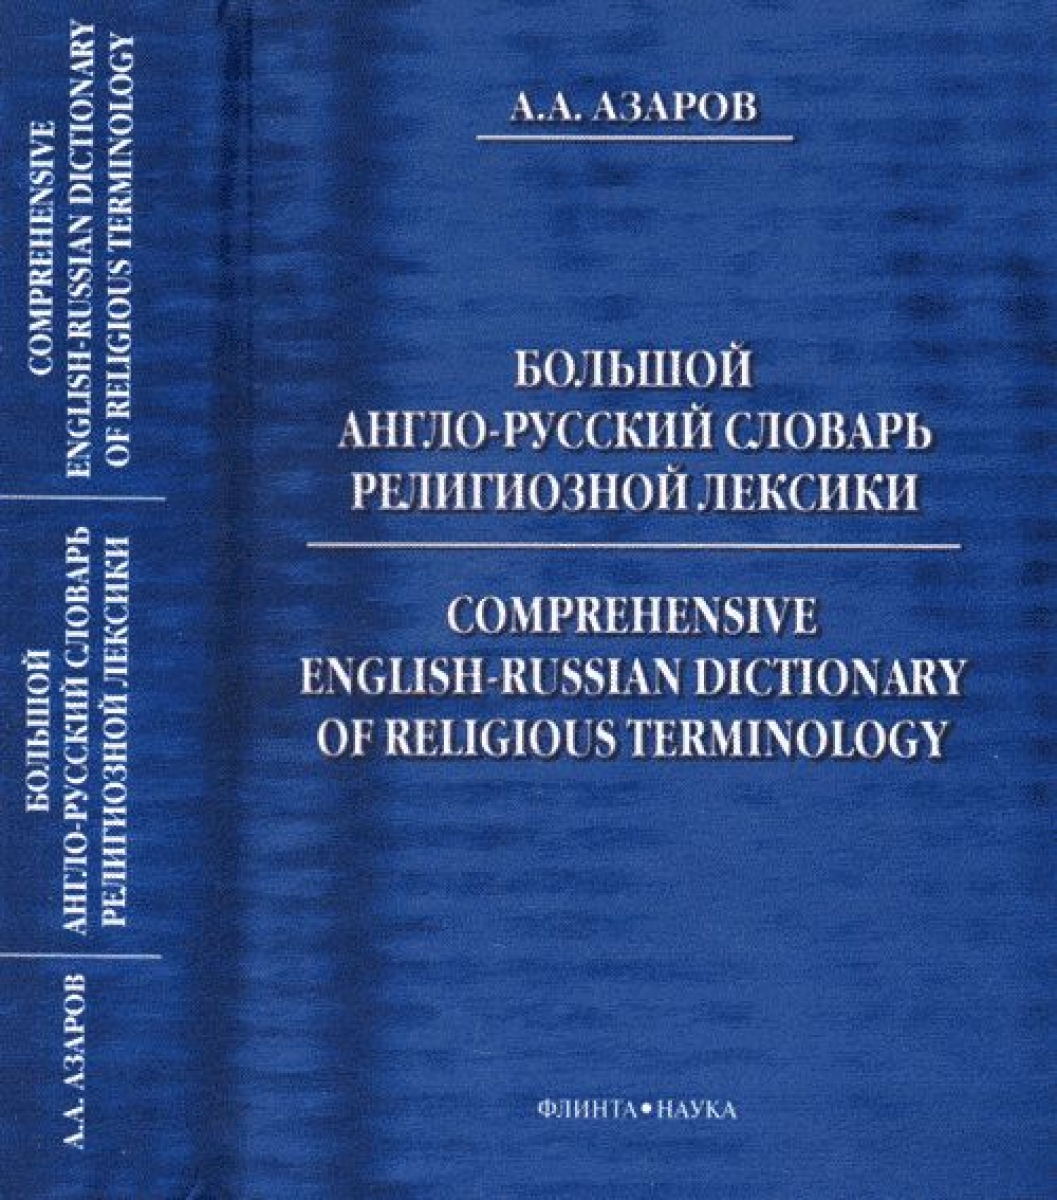  ..  -    / Comprehensive English-Russian Dictionary of Religious Terminology 